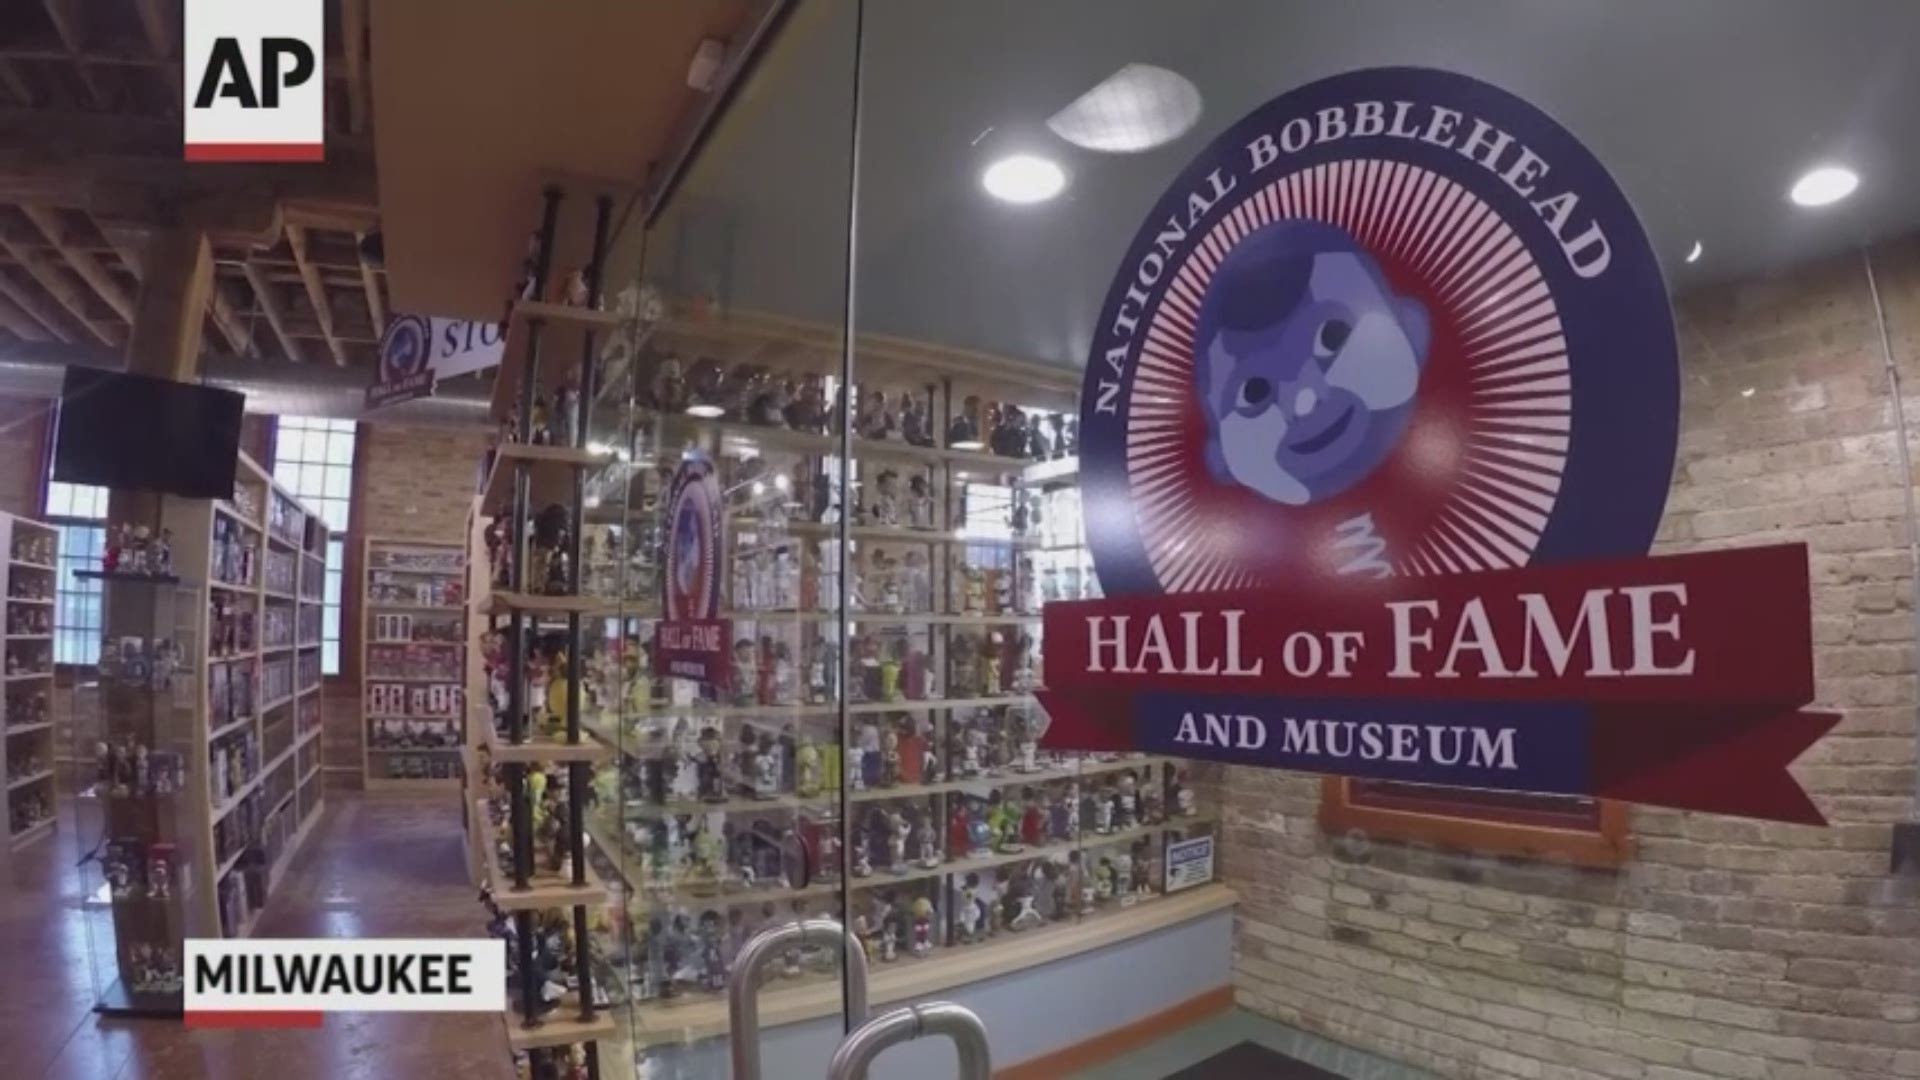 The National Bobblehead Hall of Fame and Museum has opened in Milwaukee with a collection of thousands of bobbling heads from sports, pop culture and politics. (AP)